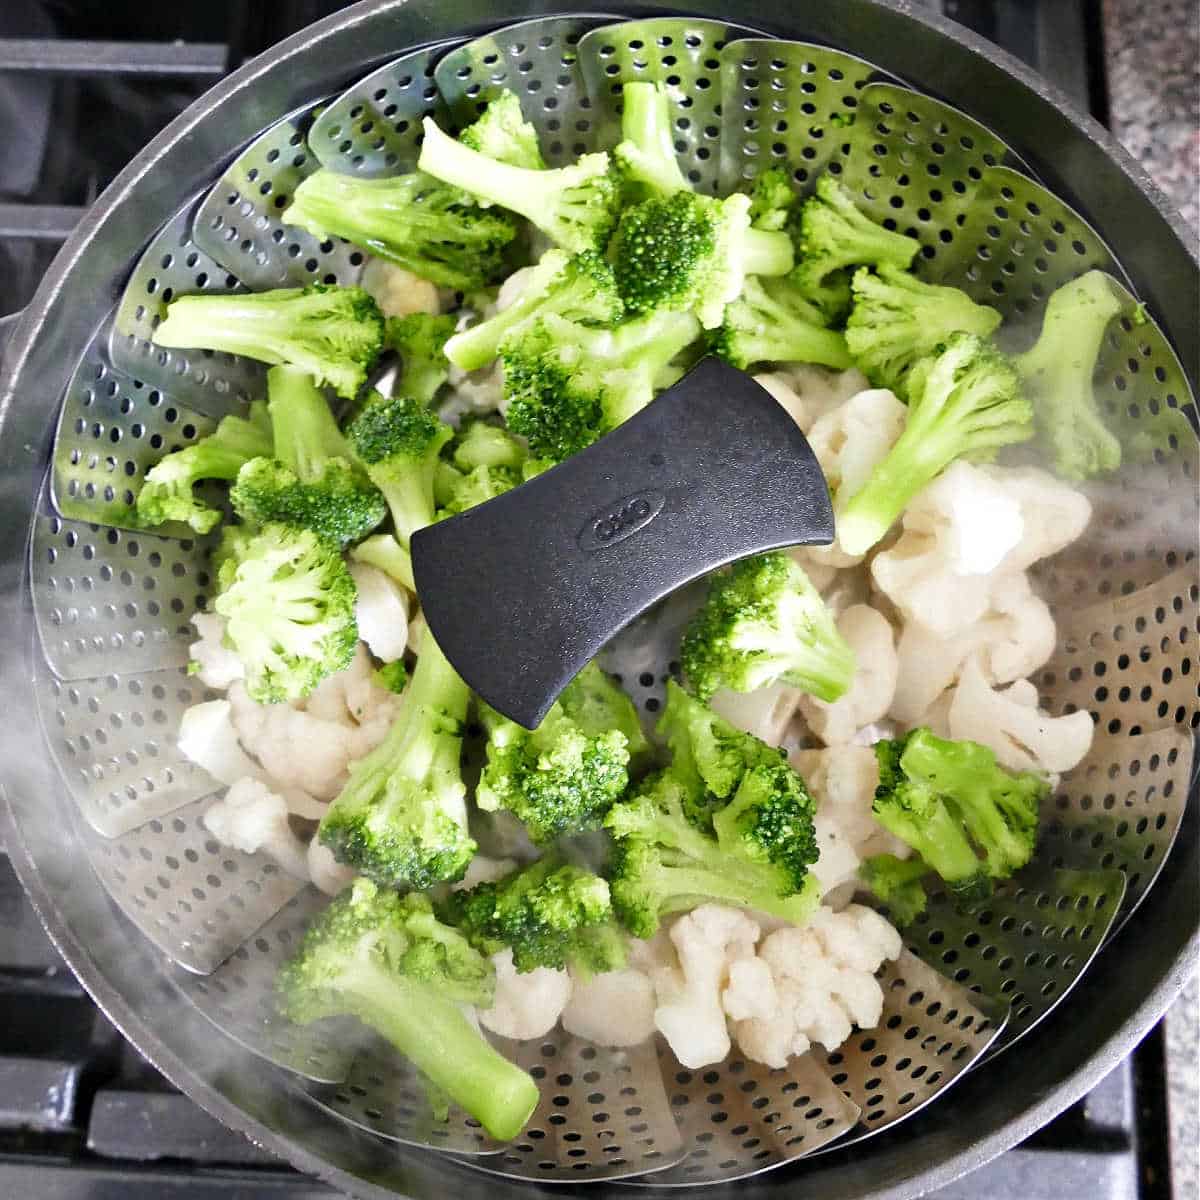 broccoli and cauliflower cooking in a vegetable steamer basket over a pot